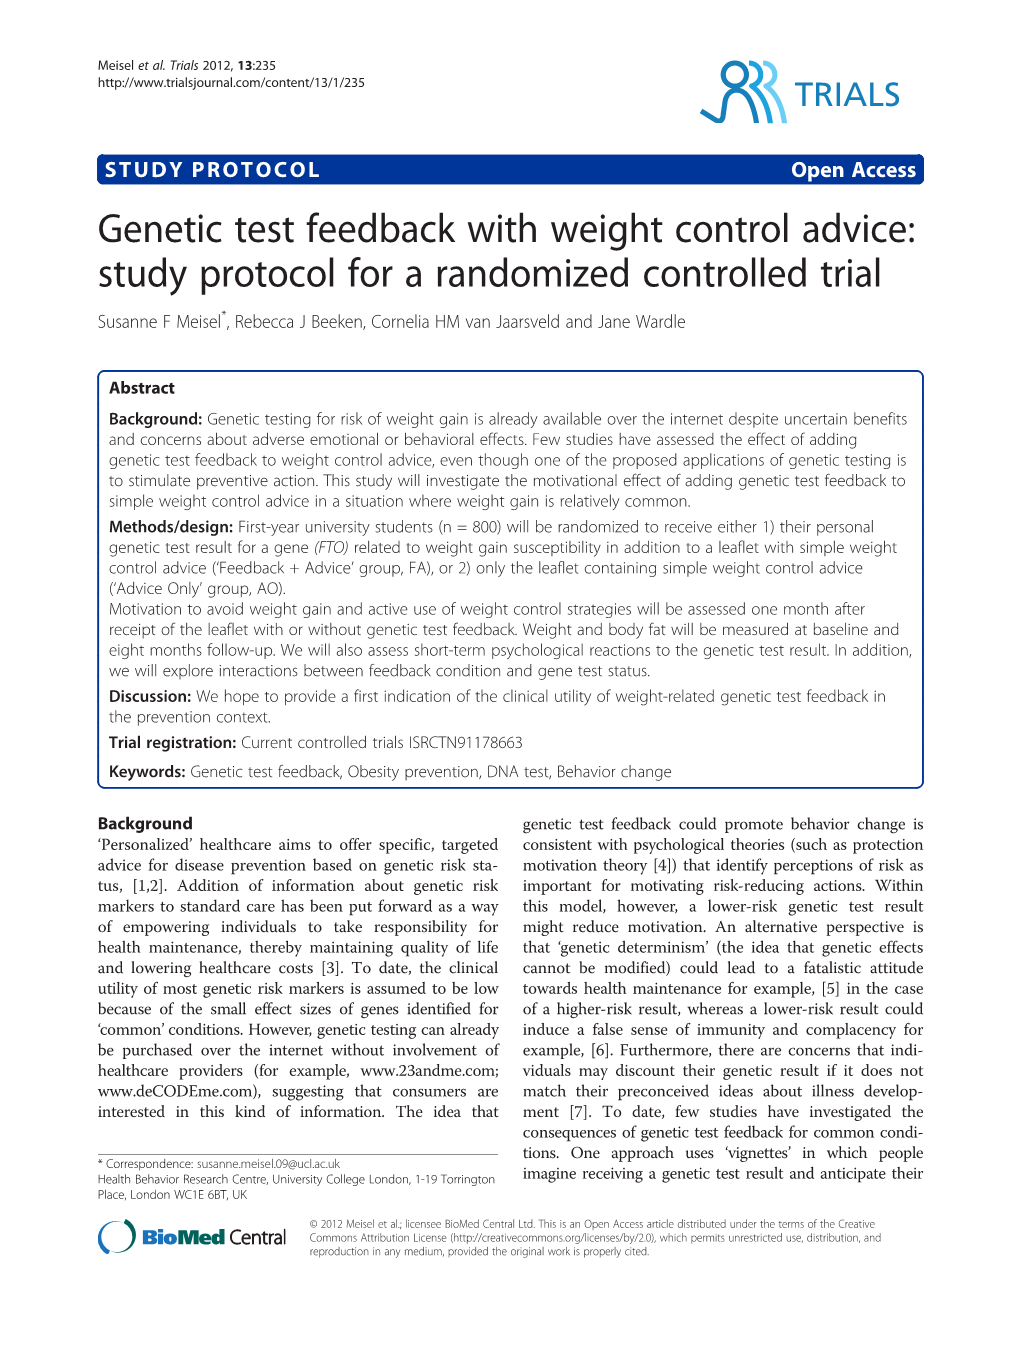 Genetic Test Feedback with Weight Control Advice